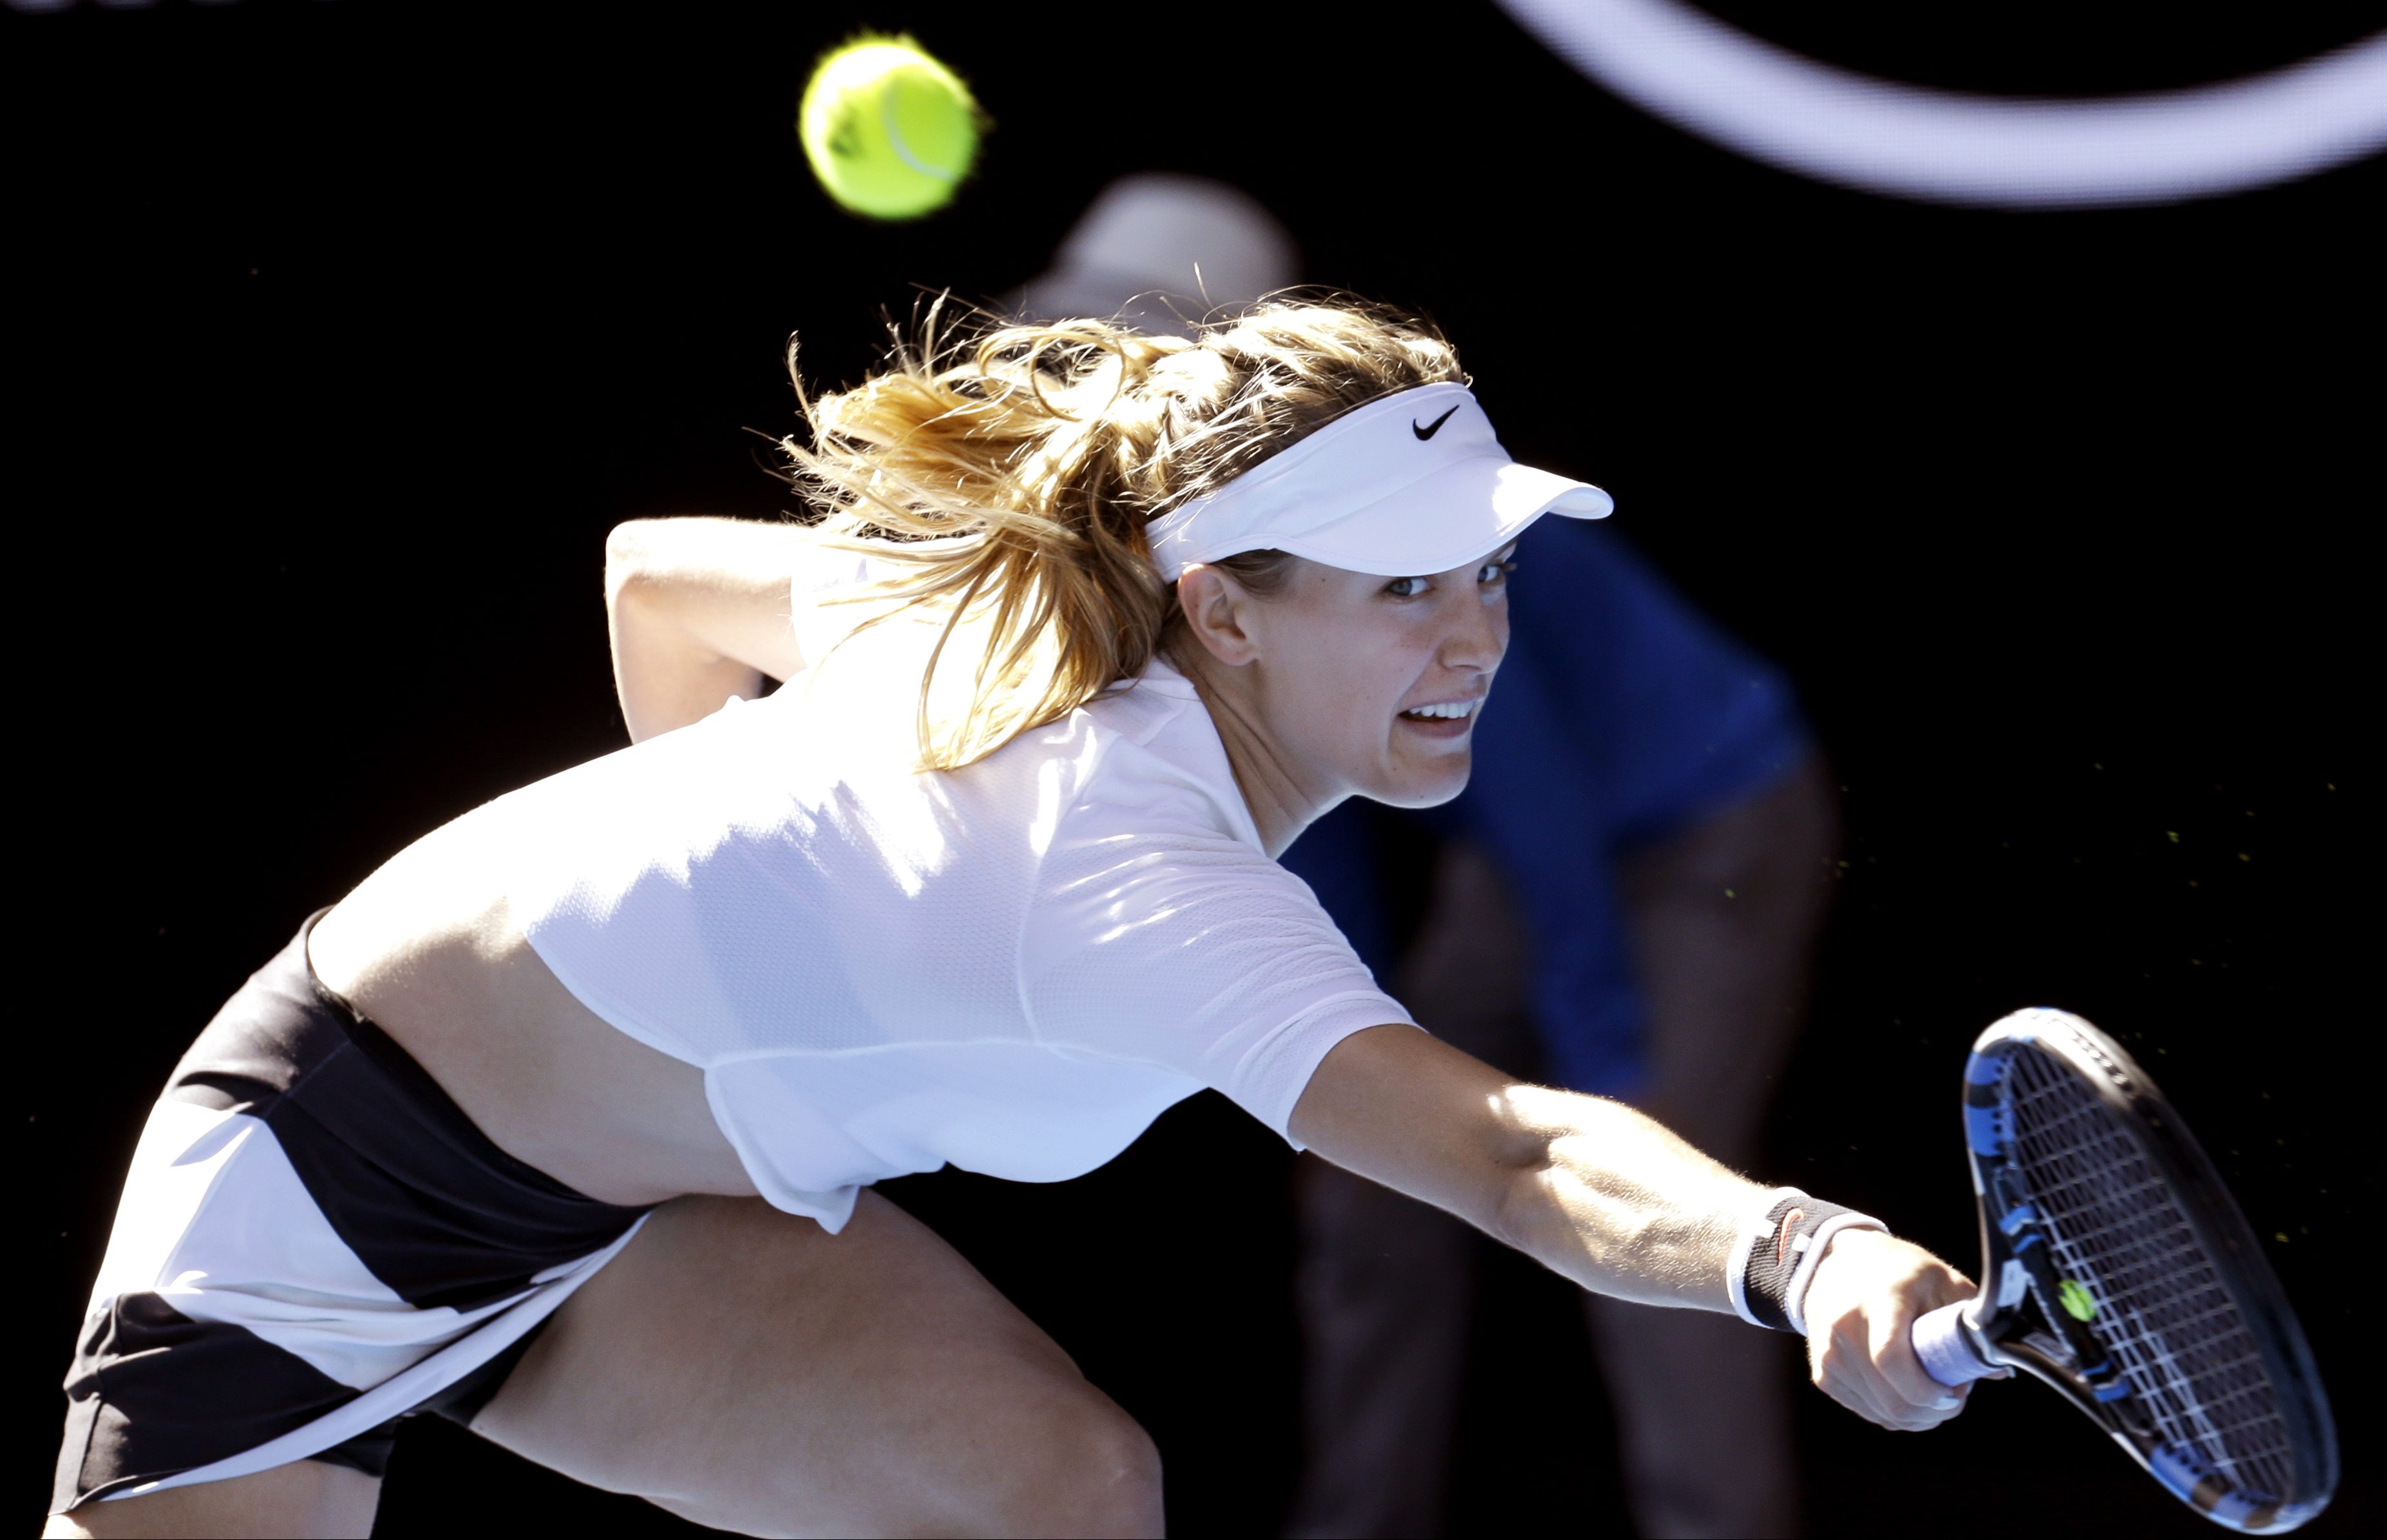 Canada's Eugenie Bouchard reaches for a return to China's Peng Shuai during their second round match at the Australian Open tennis championships in Melbourne, Australia, Wednesday, Jan. 18, 2017. (AP Photo/Aaron Favila)